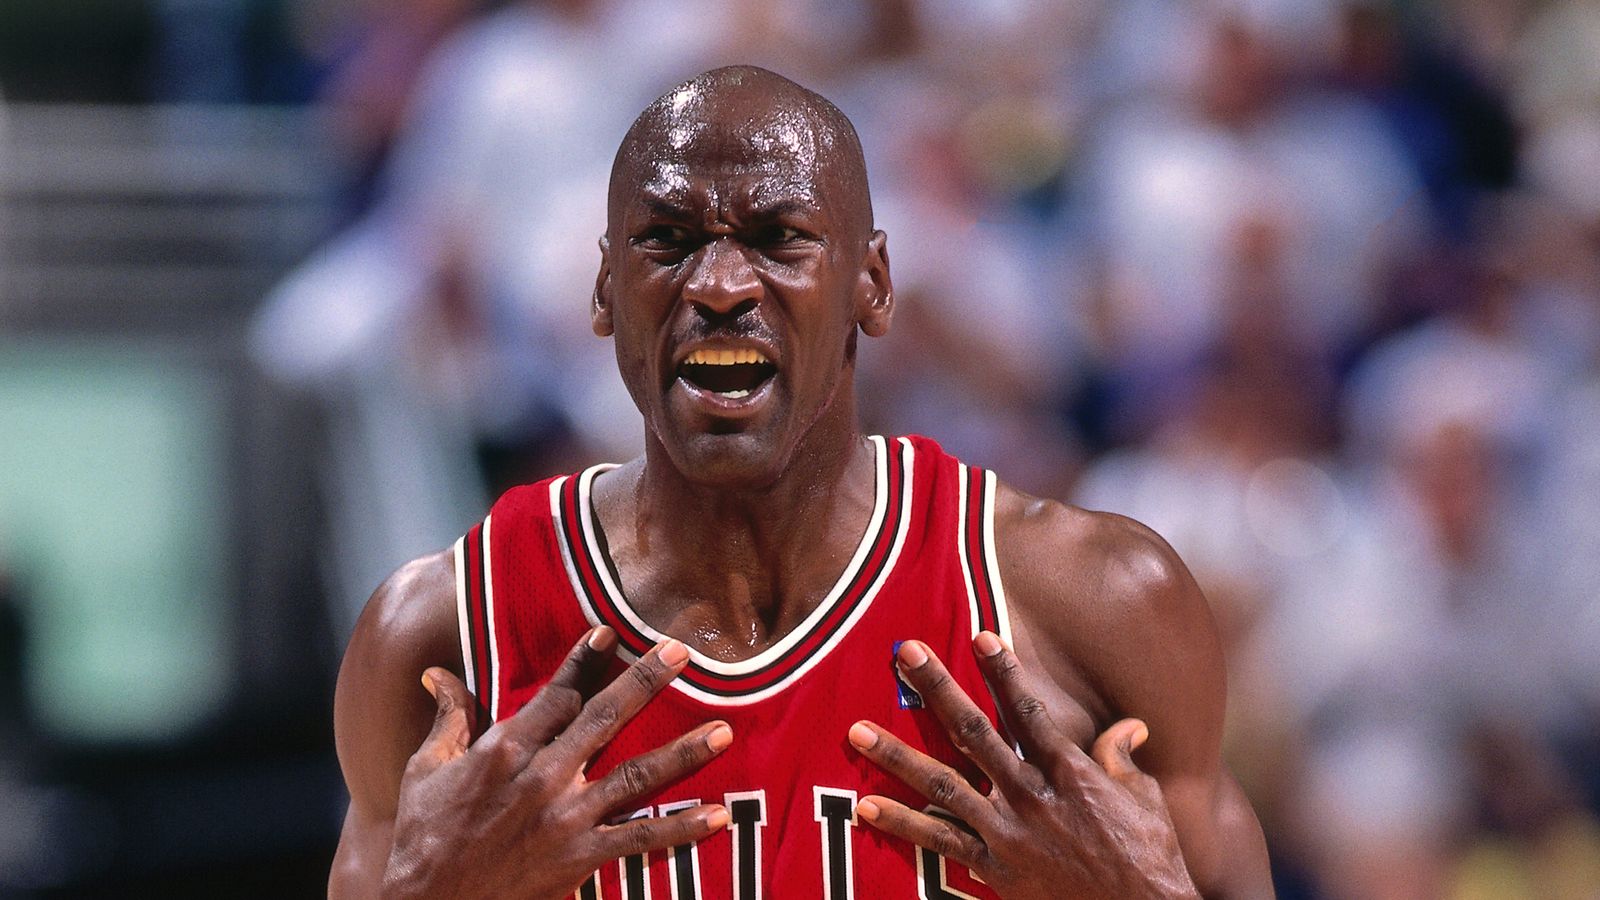 Michael Jordan inspired more fear in opponents than other player, says Tuck | NBA News | Sky Sports